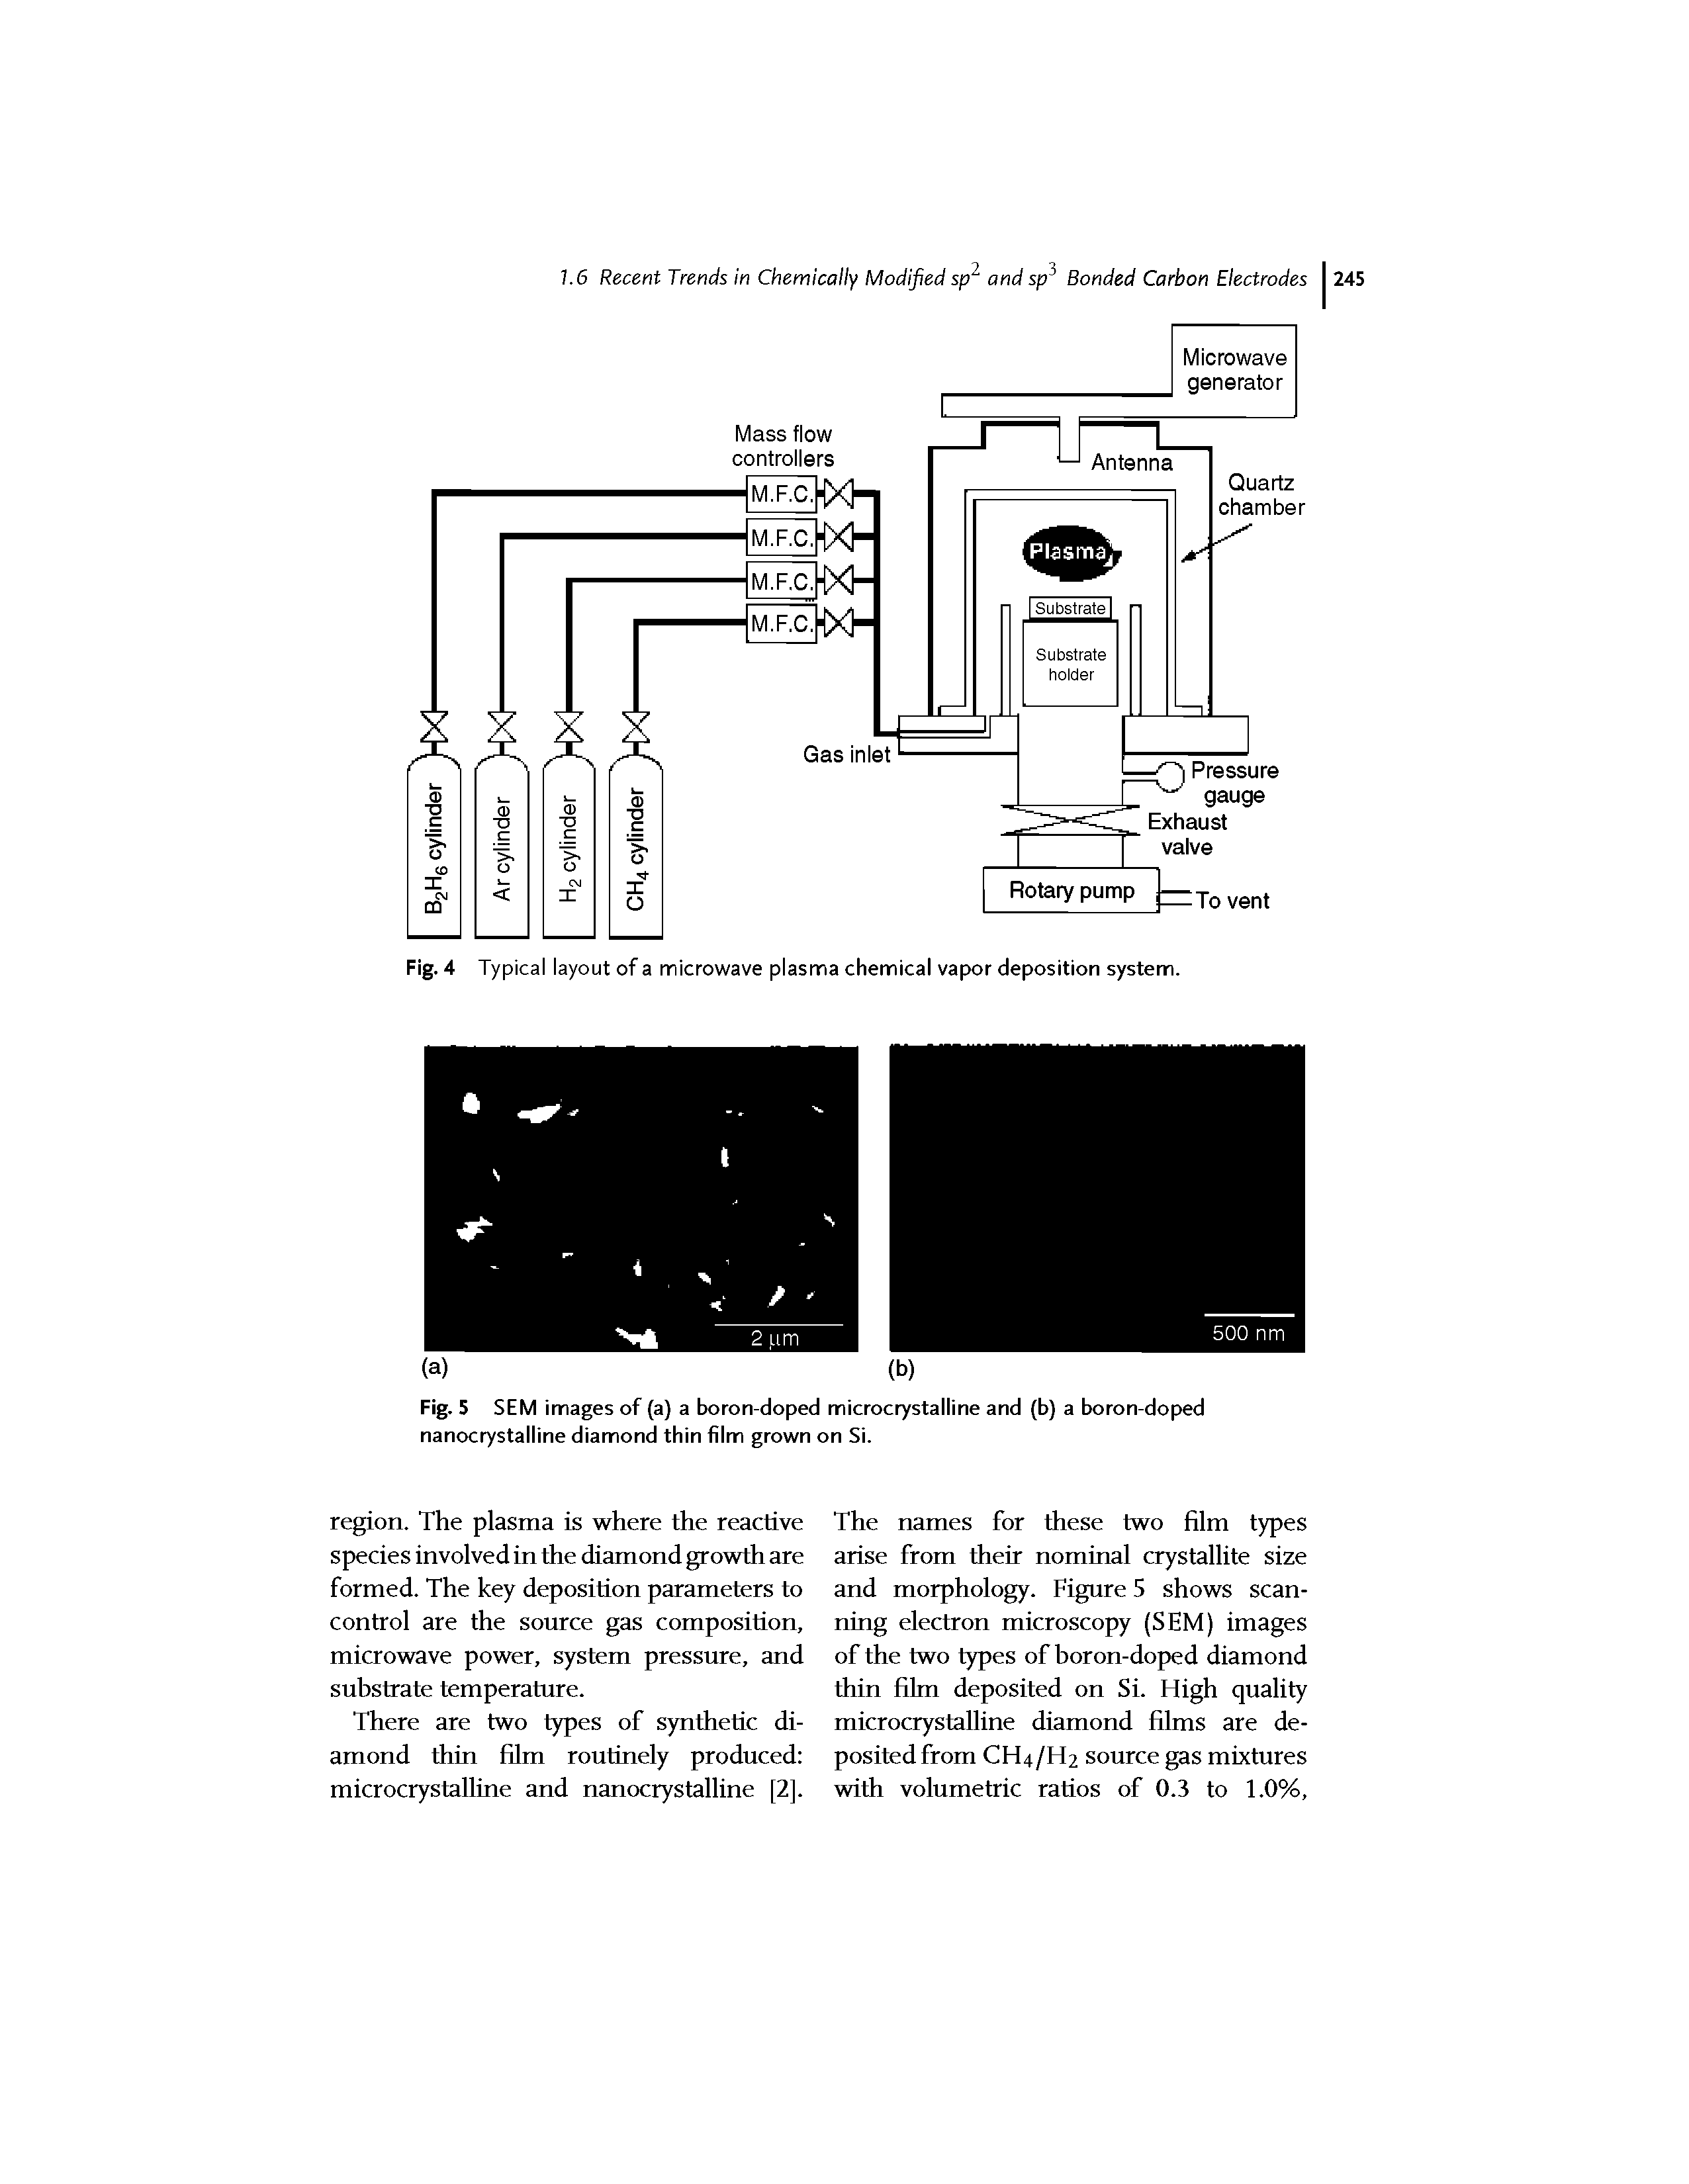 Fig. 4 Typical layout of a microwave plasma chemical vapor deposition system.